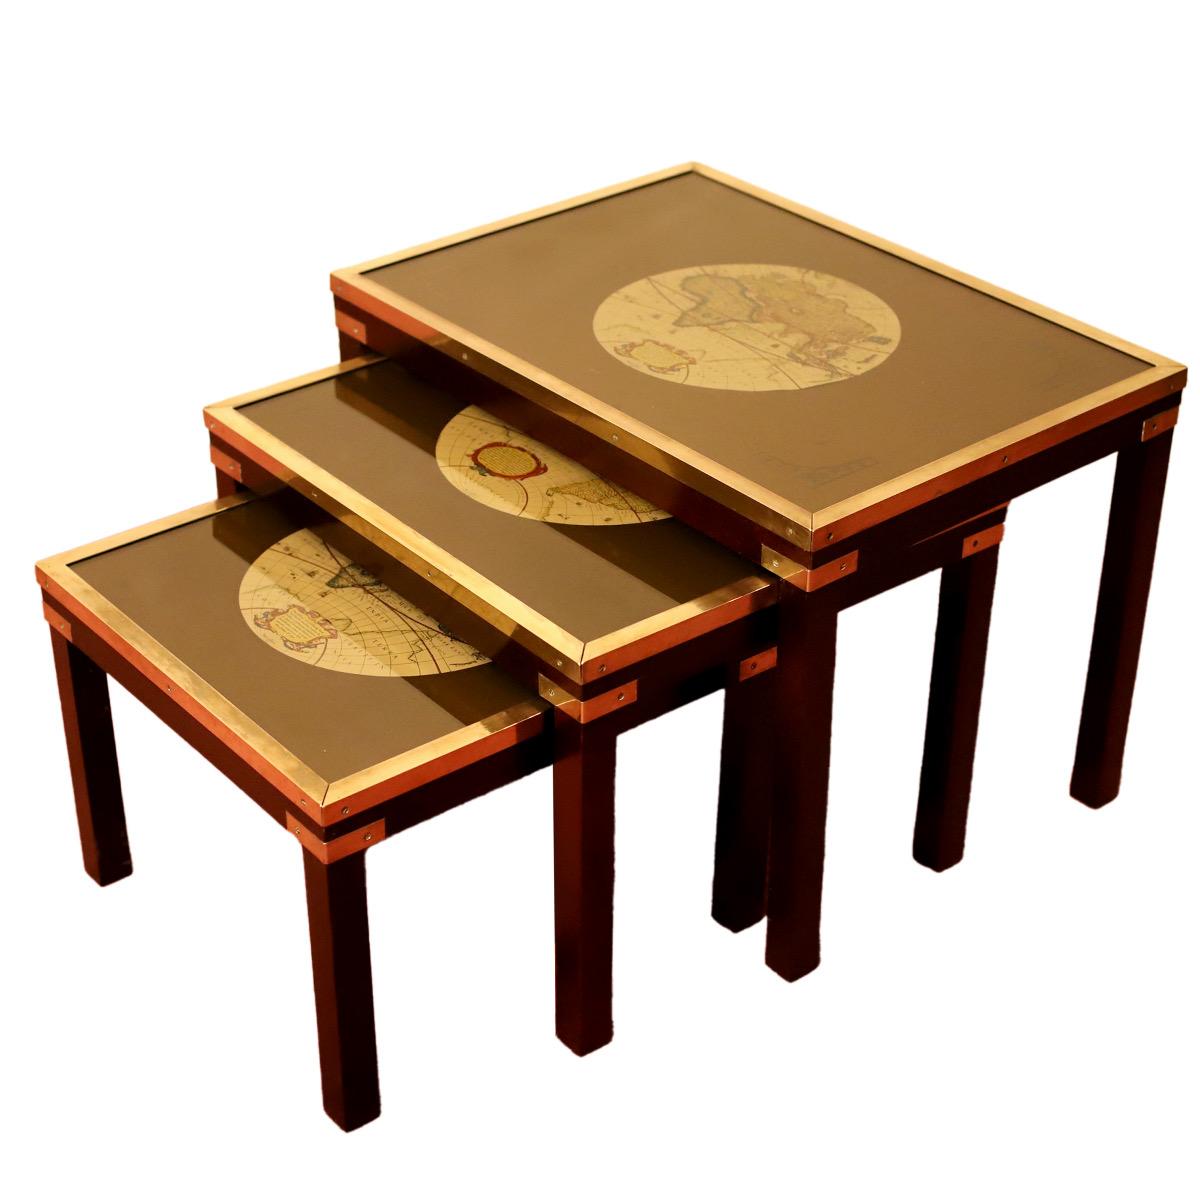 Beautiful Brass Bound Military Campaign Nesting Tables with glass top and decorative antique world map.
Don't hesitate to contact me if you have any questions.
Please have a closer look at the pictures because they form part of the